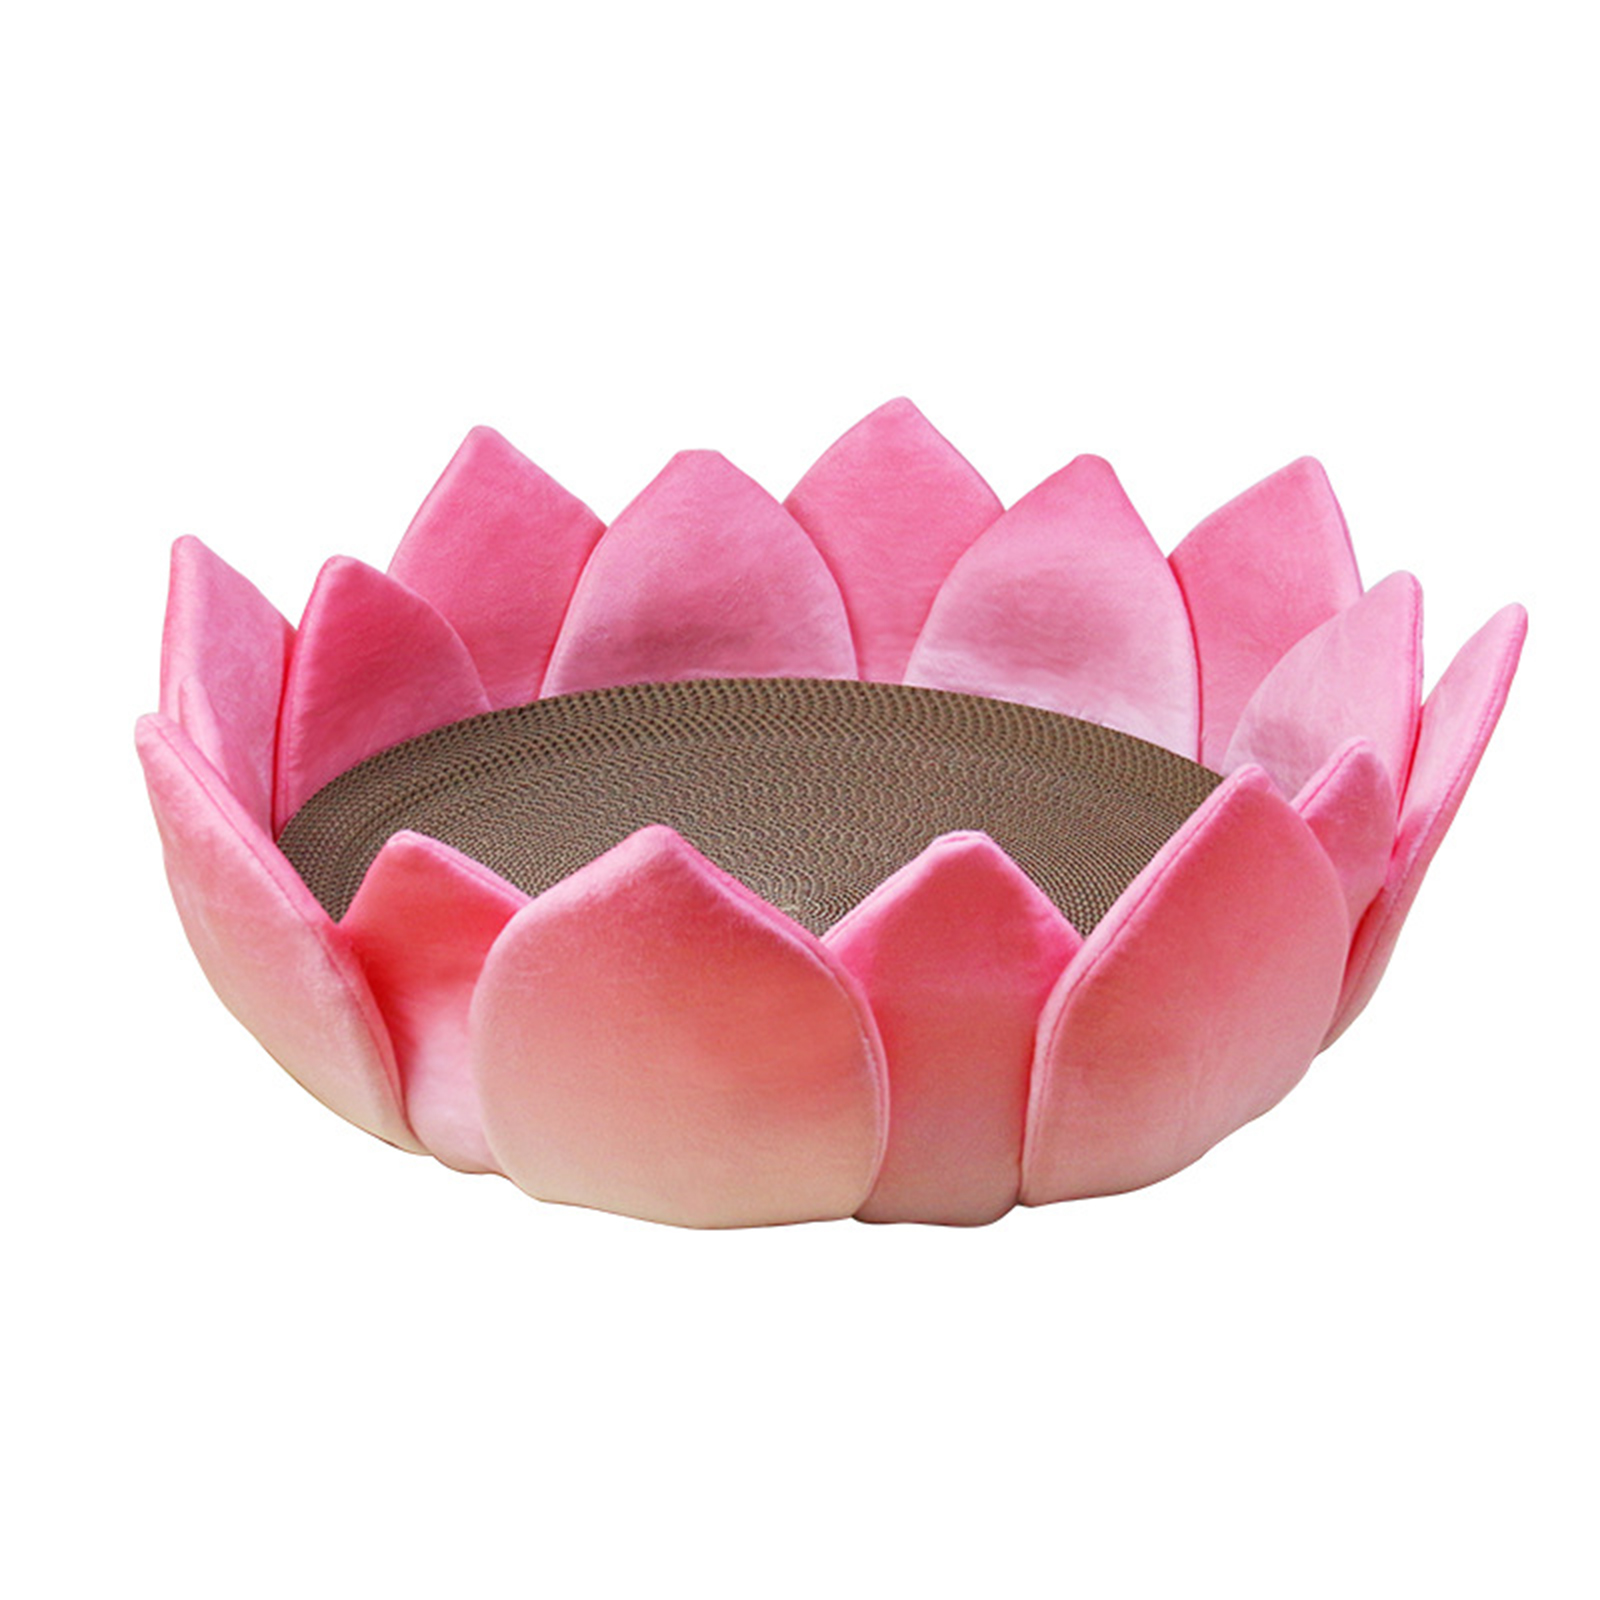 Lotus Shaped Cat Sofa With 17CM Raised Petals Wear-resistant Anti-Scratch Cat Scratching Board Pet Supplies For Indoor Cats (30 x 30cm) lotus cushion small